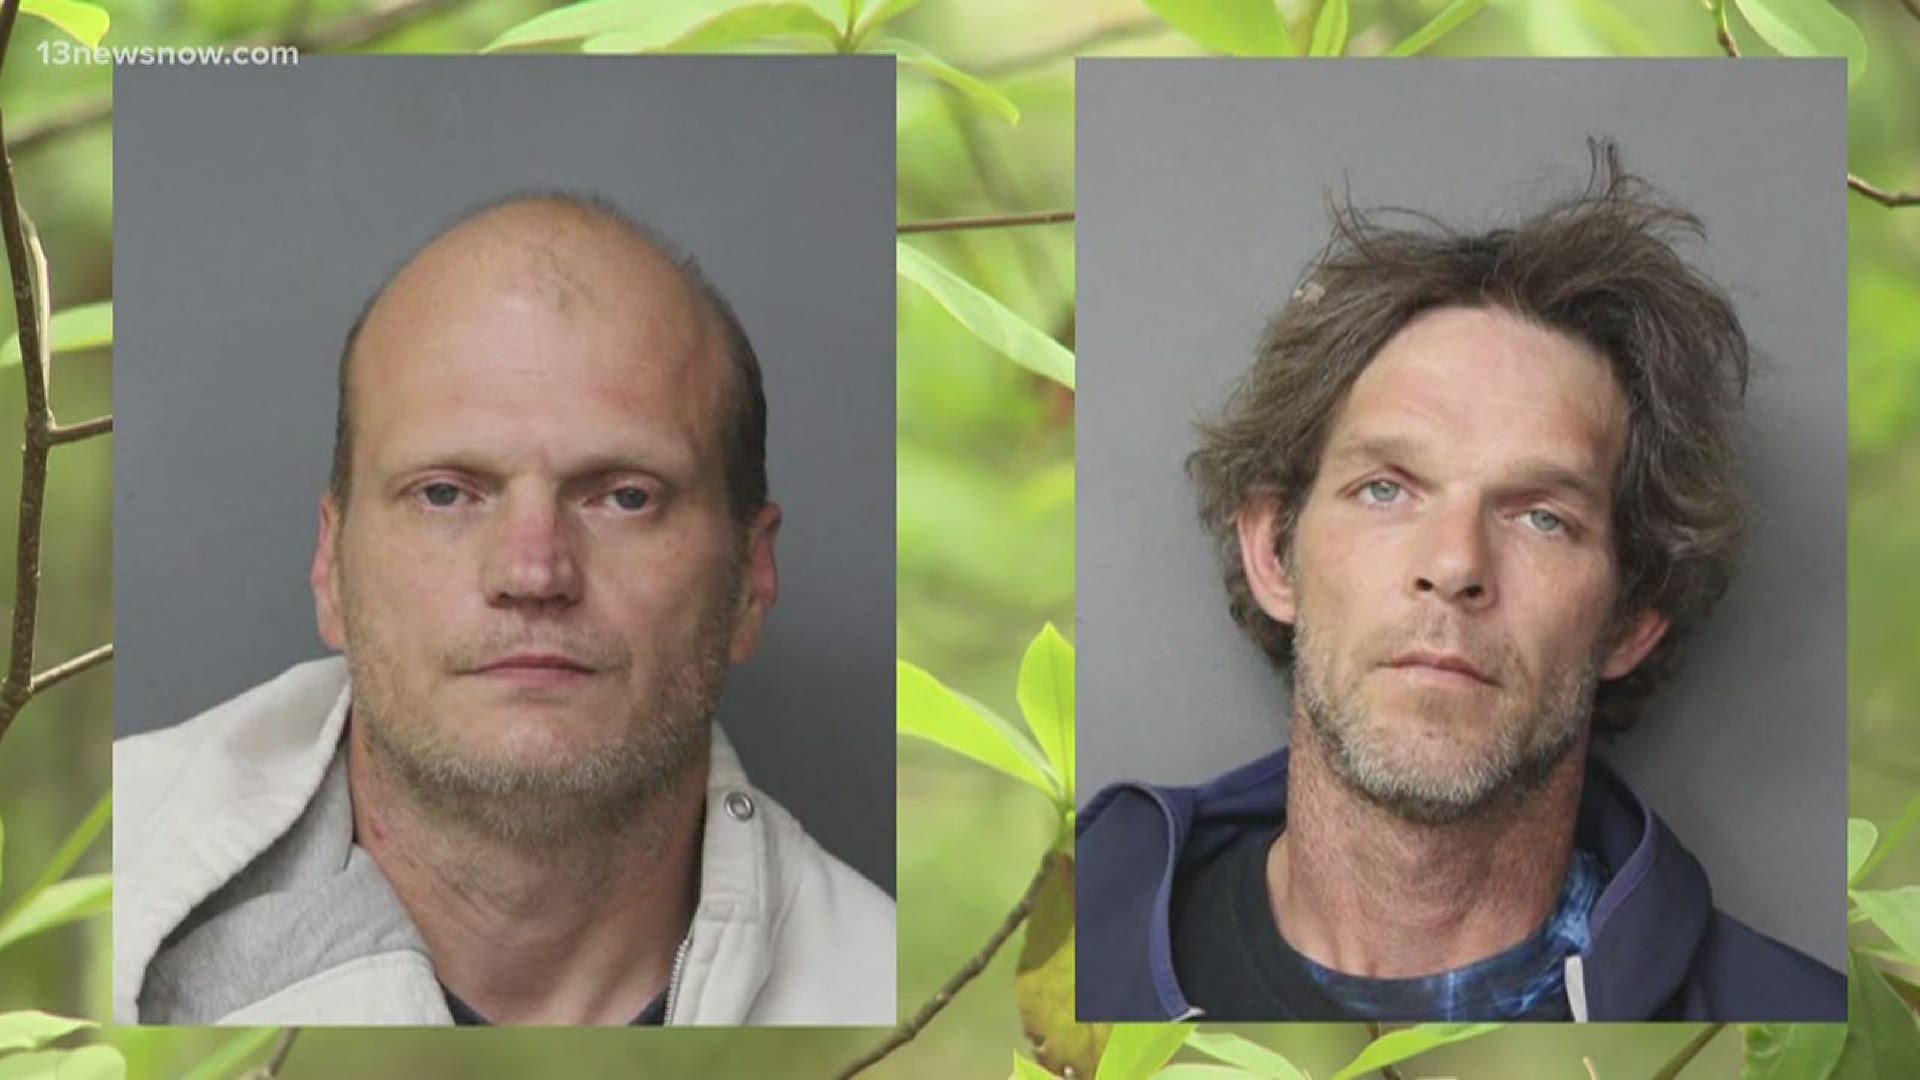 Kevin Dunn and Robert Carroll were charged after a body wrapped in plastic was found behind Tabb Library. The death is still under investigation.